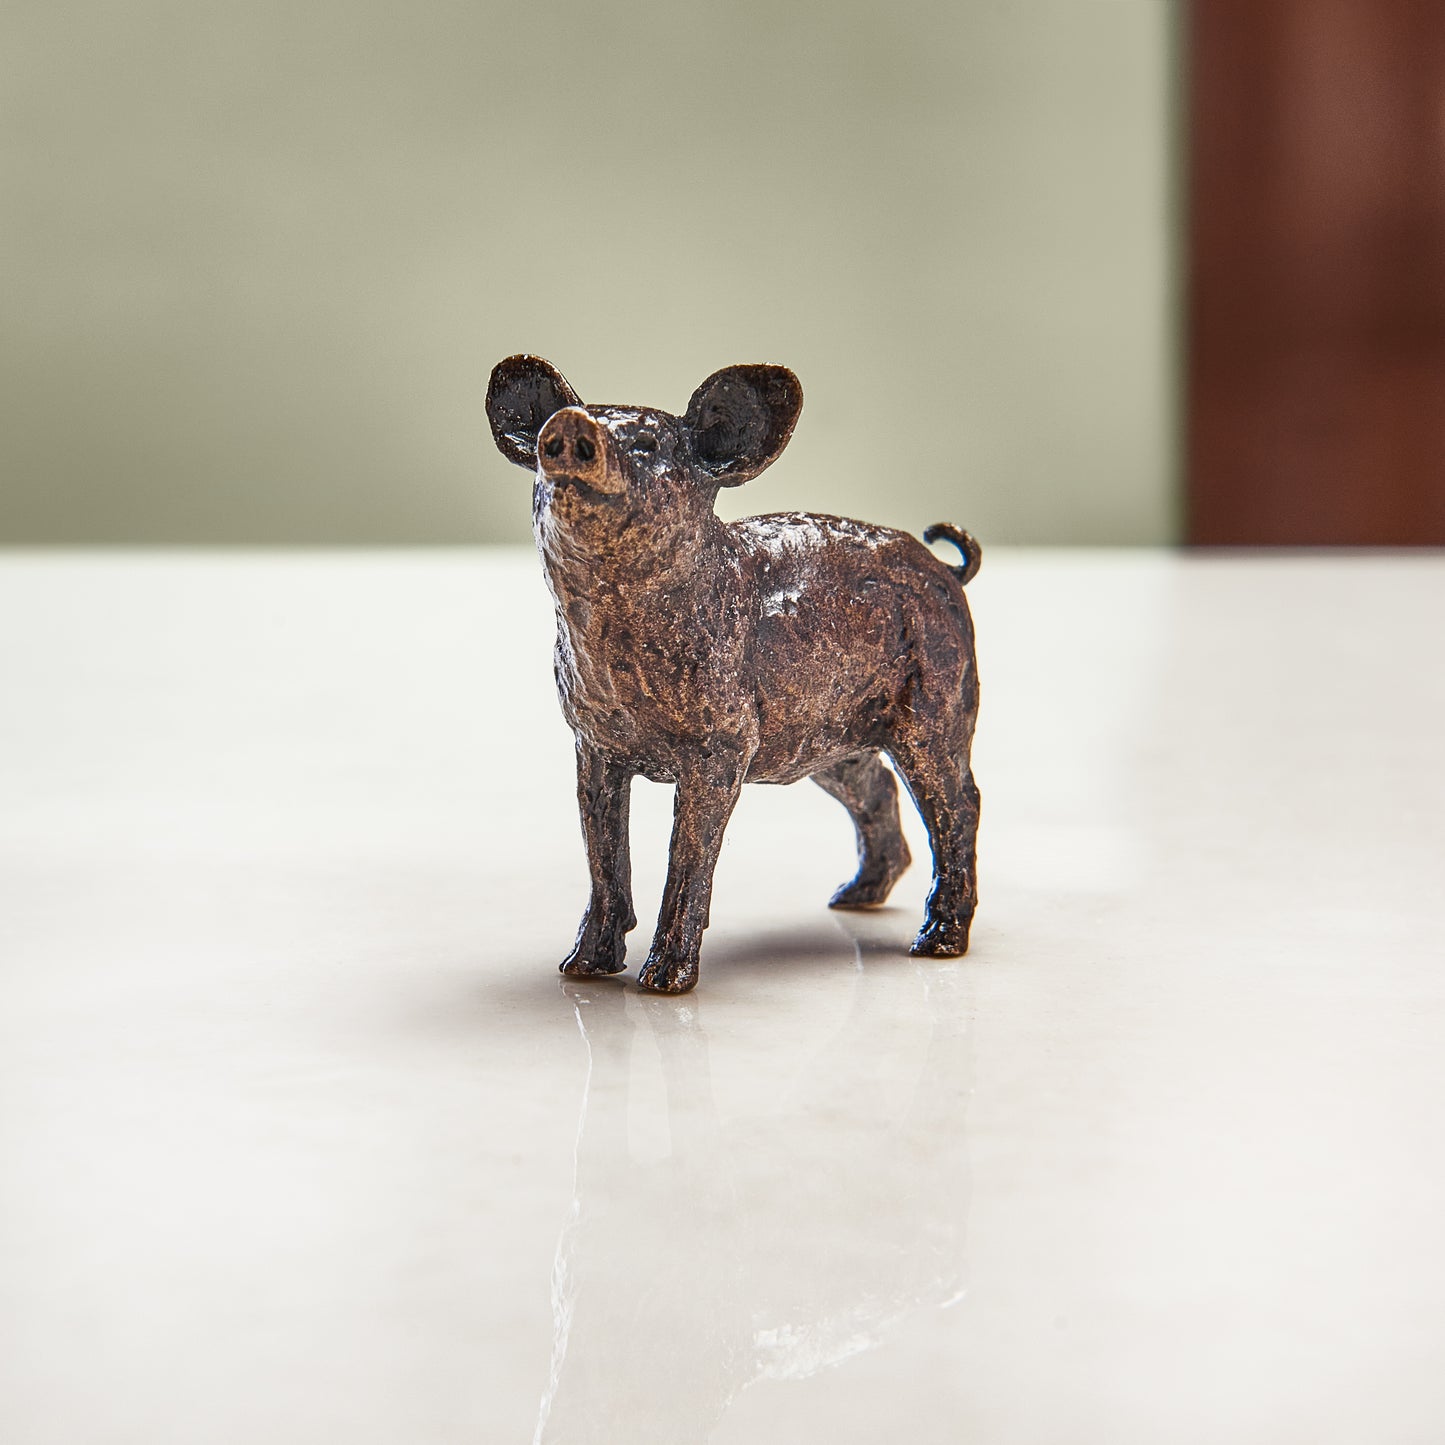 Miniature bronze pig figurine to give as a bronze anniversary gift or decorative home accessory.